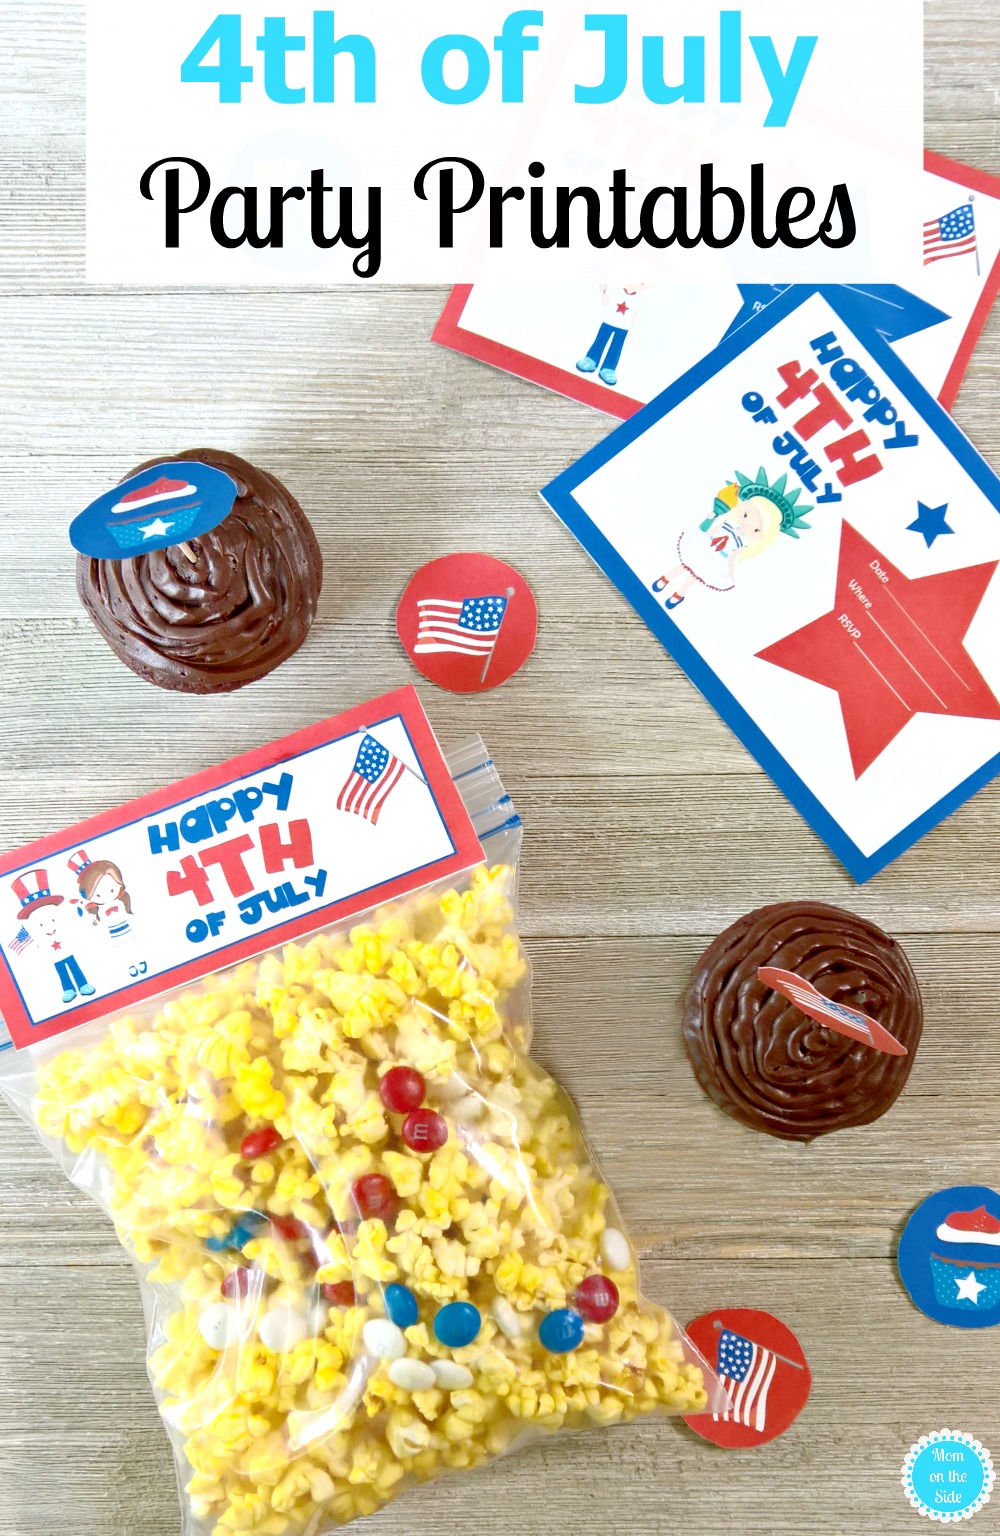 4th of July Printables - Invitations, Cupcake Toppers, and Snack Bag Toppers